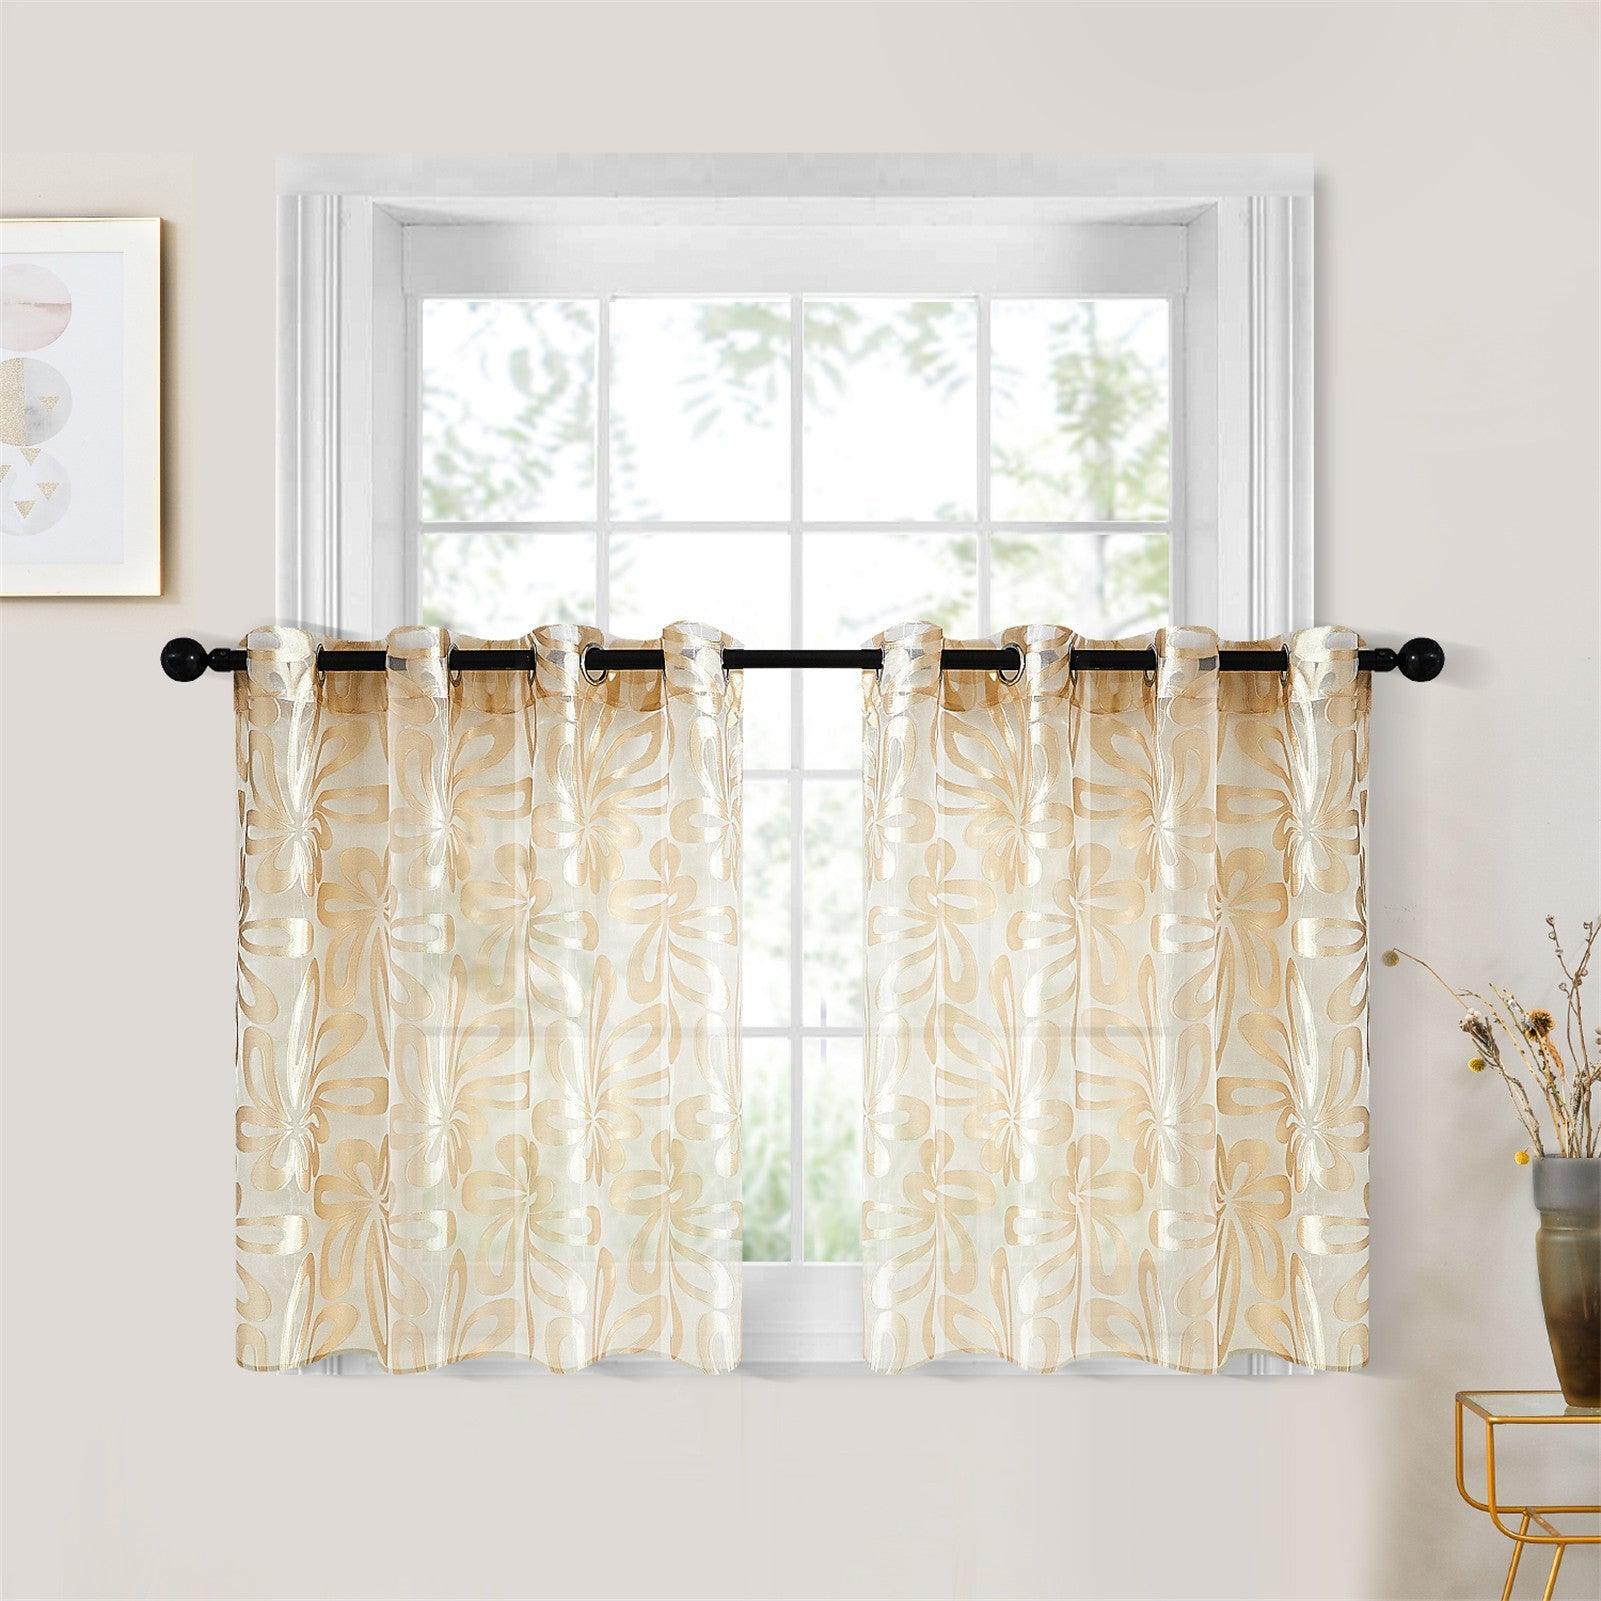 Topfinel Semi Tier & Cafe Curtains Floral  White Sheer Crtains For Kitchen,2 Panels - Topfinel